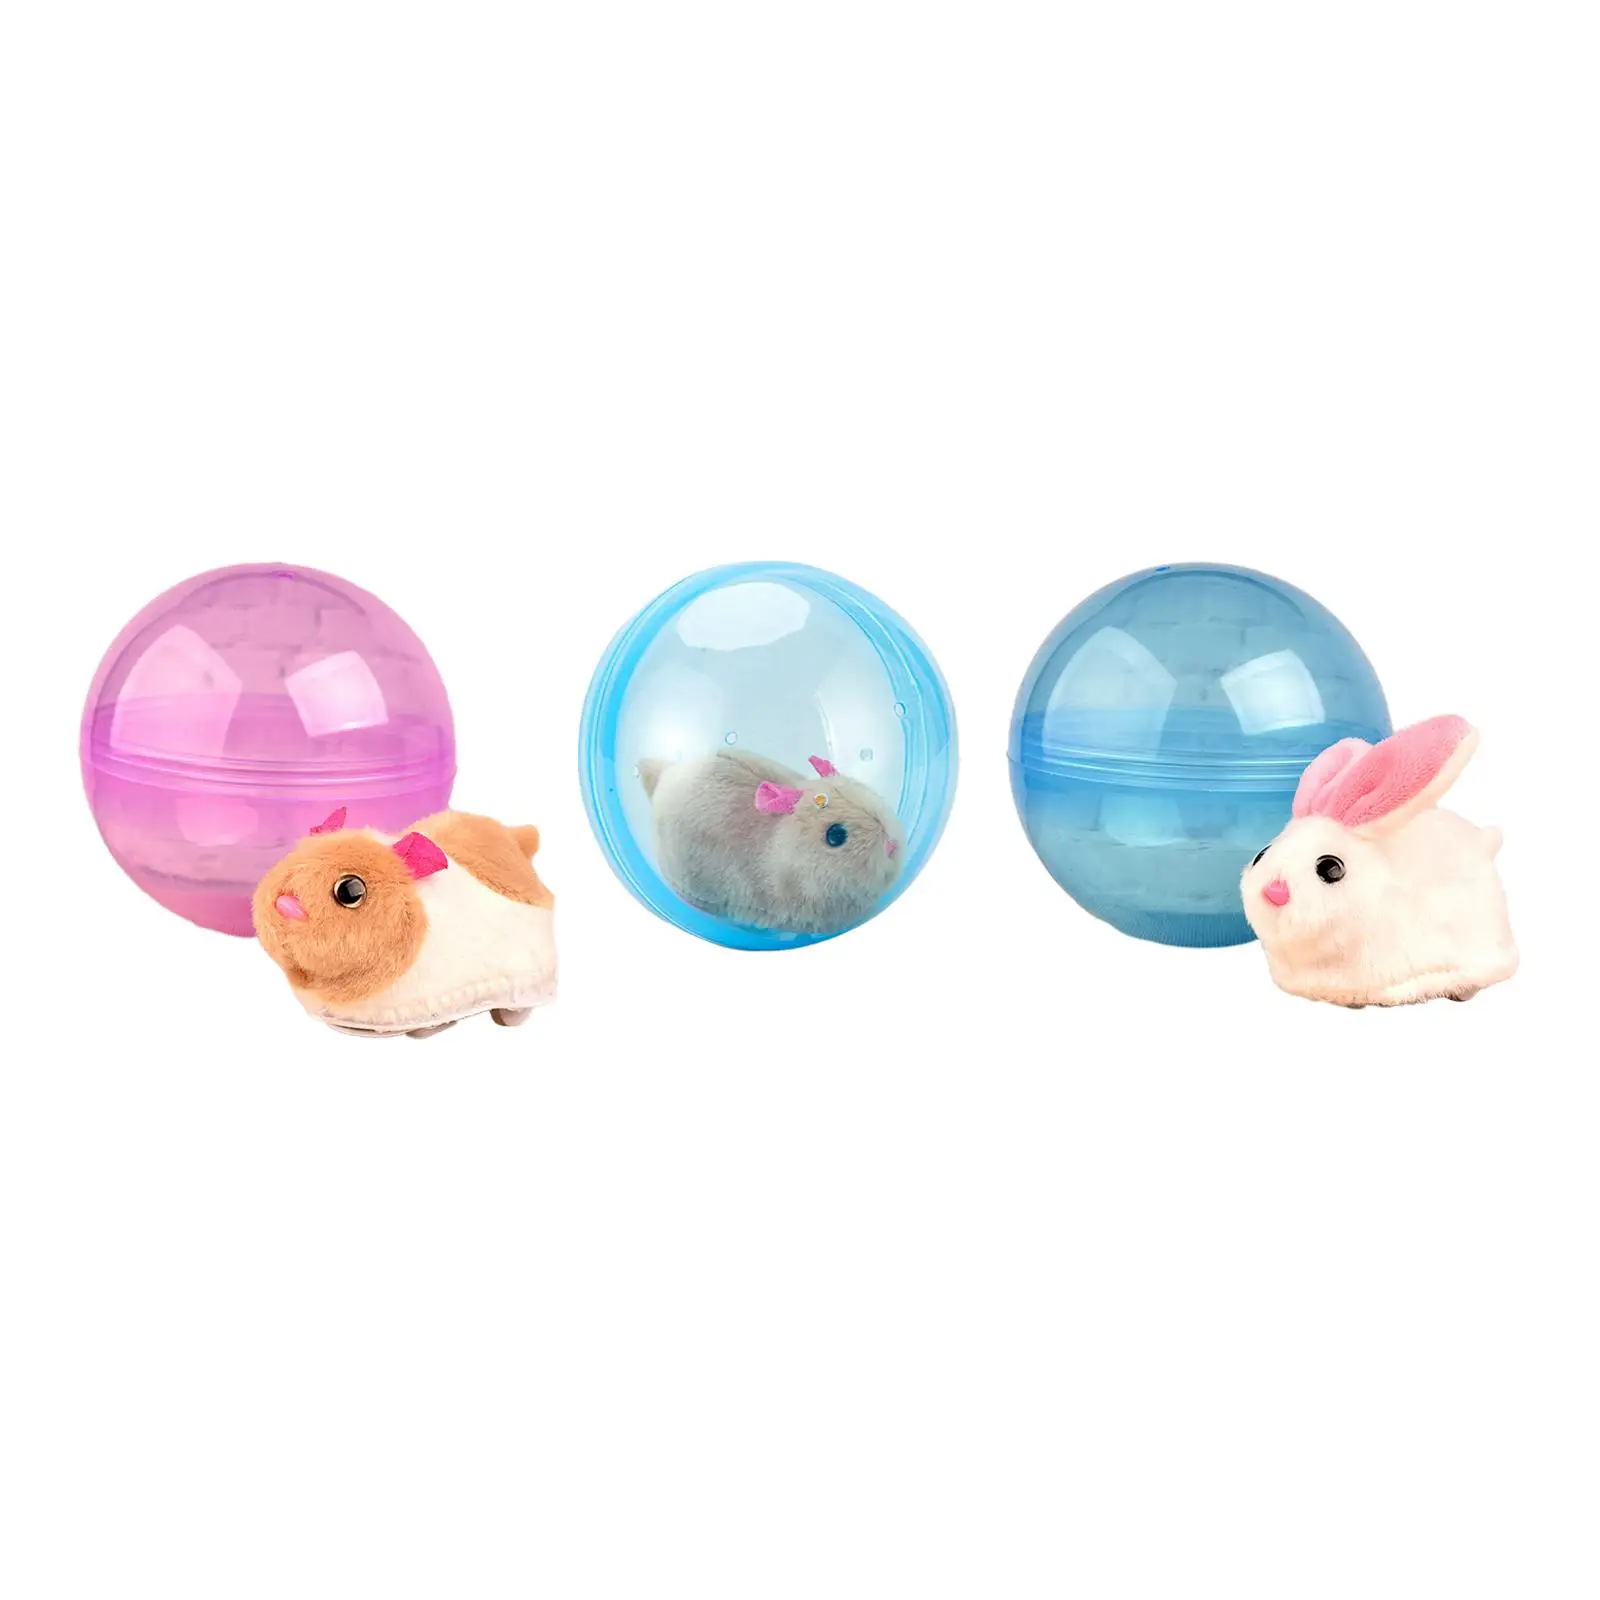 Electric Ball Toys Interactive Enjoy Fun Electronic Pets Toy Early Educatioanal Toys for Kids Boys Children Girls Gifts